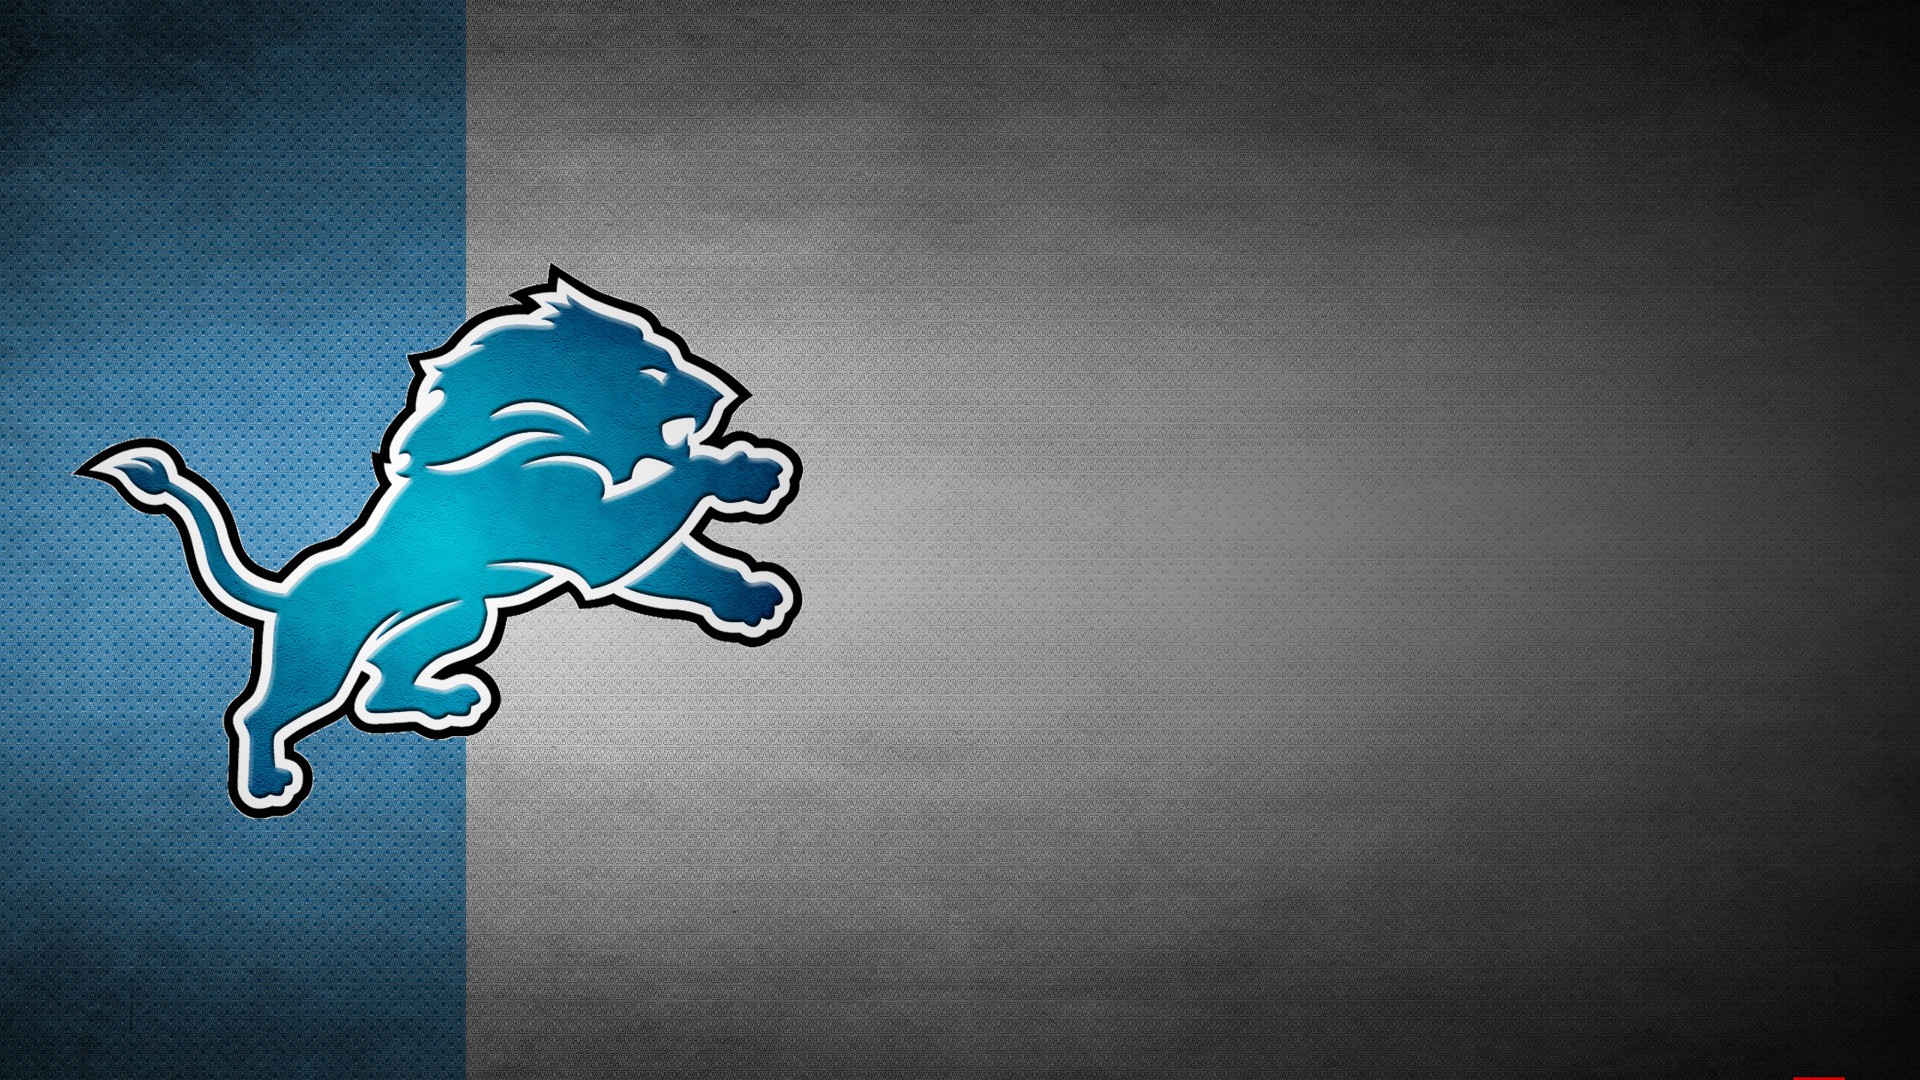 Detroit Lions NFL Wallpaper With high-resolution 1920X1080 pixel. You can use this wallpaper for your Mac or Windows Desktop Background, iPhone, Android or Tablet and another Smartphone device